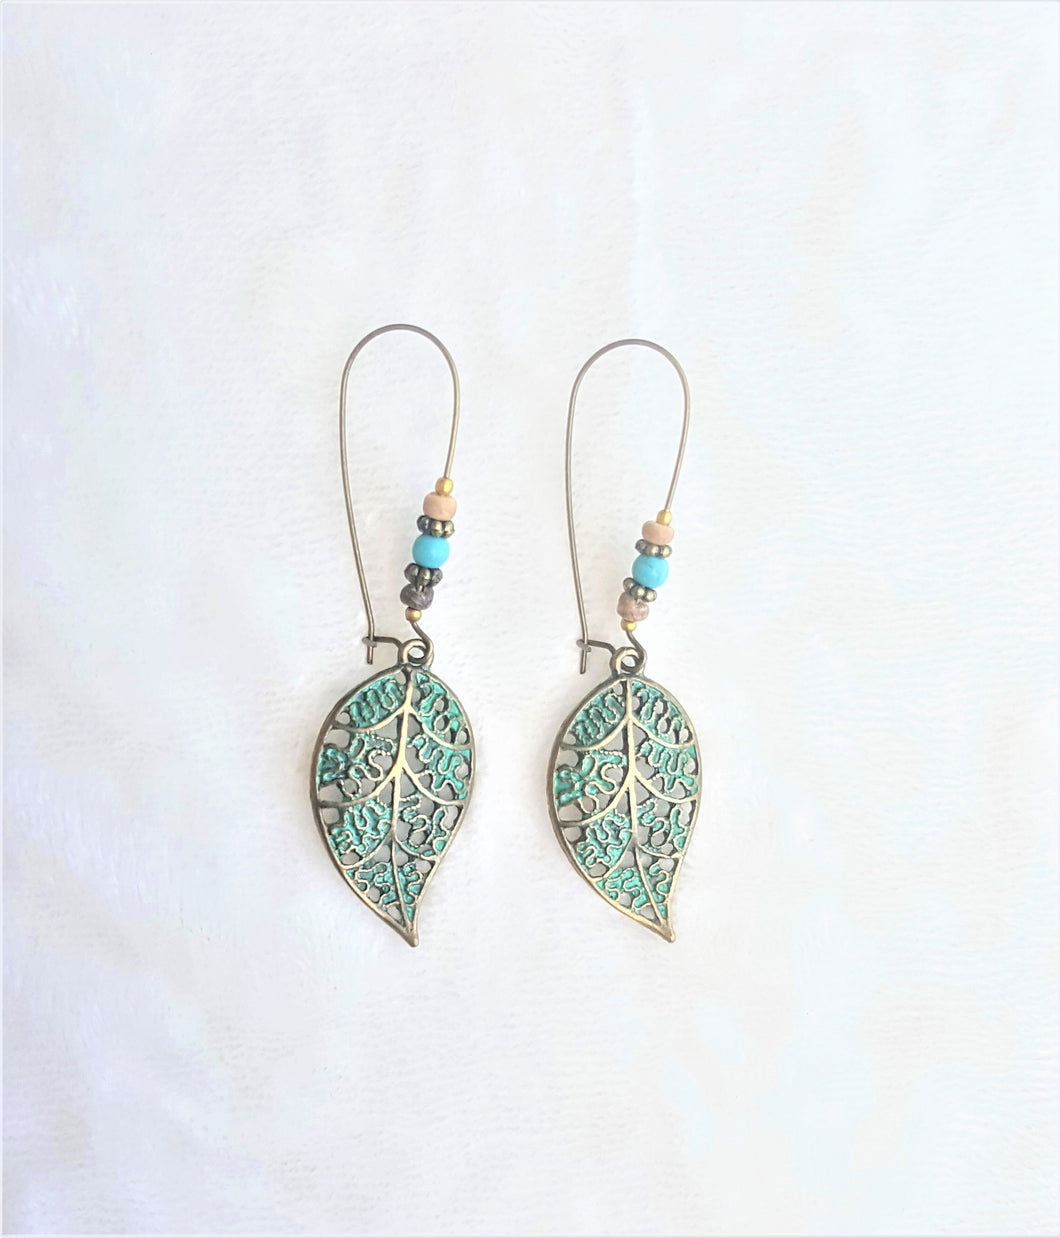 Leaf Charm Earrings, Vintage Style Oxidized Antique Gold Dangle Drop Earrings with Wooden Beads - Urban Flair USA